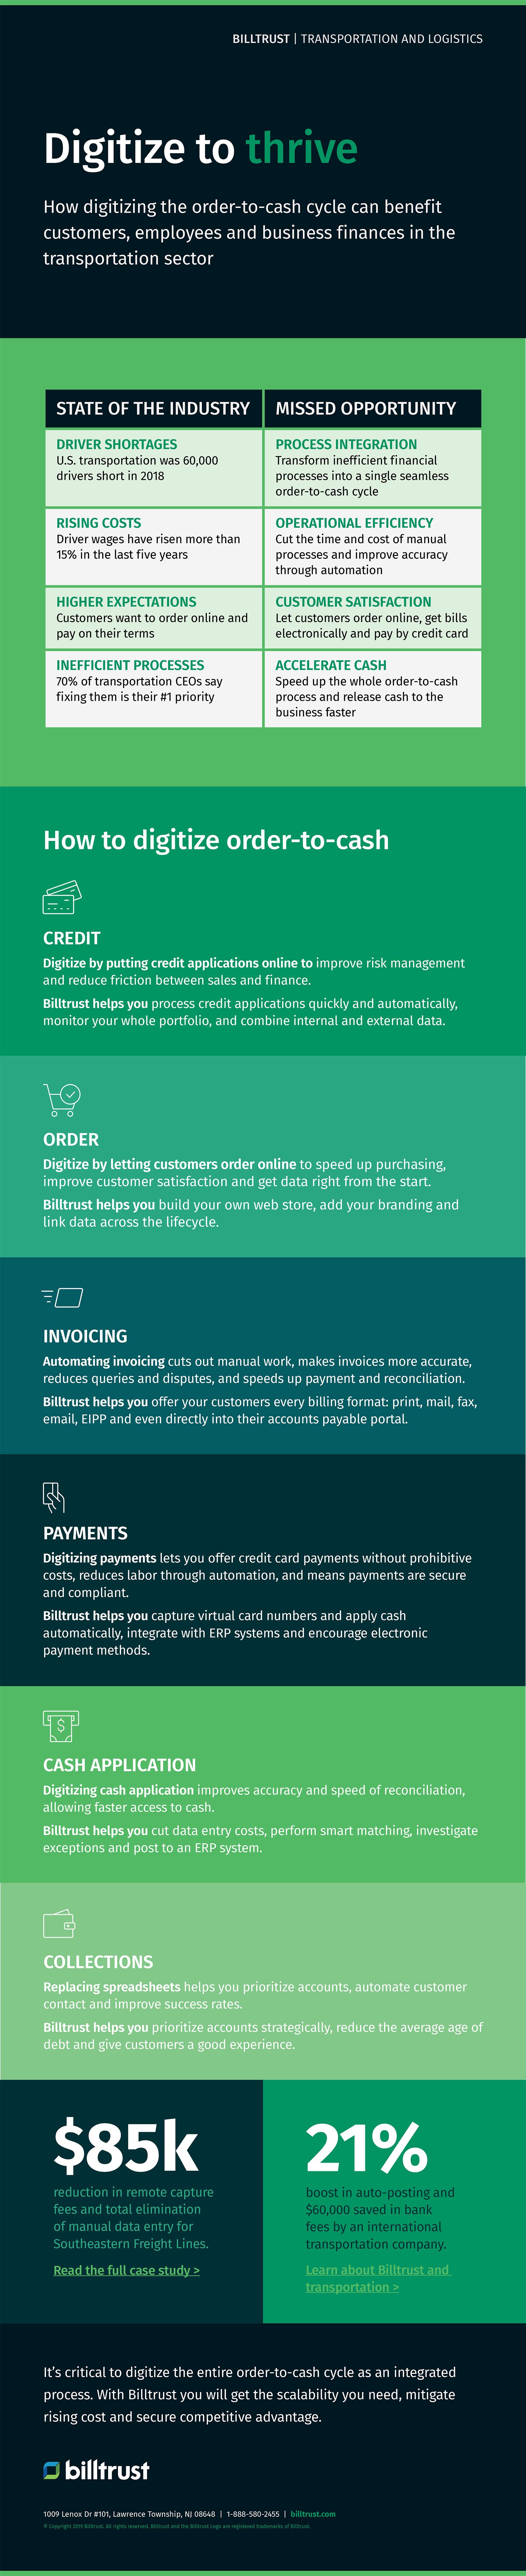 Digitize to thrive Infographic